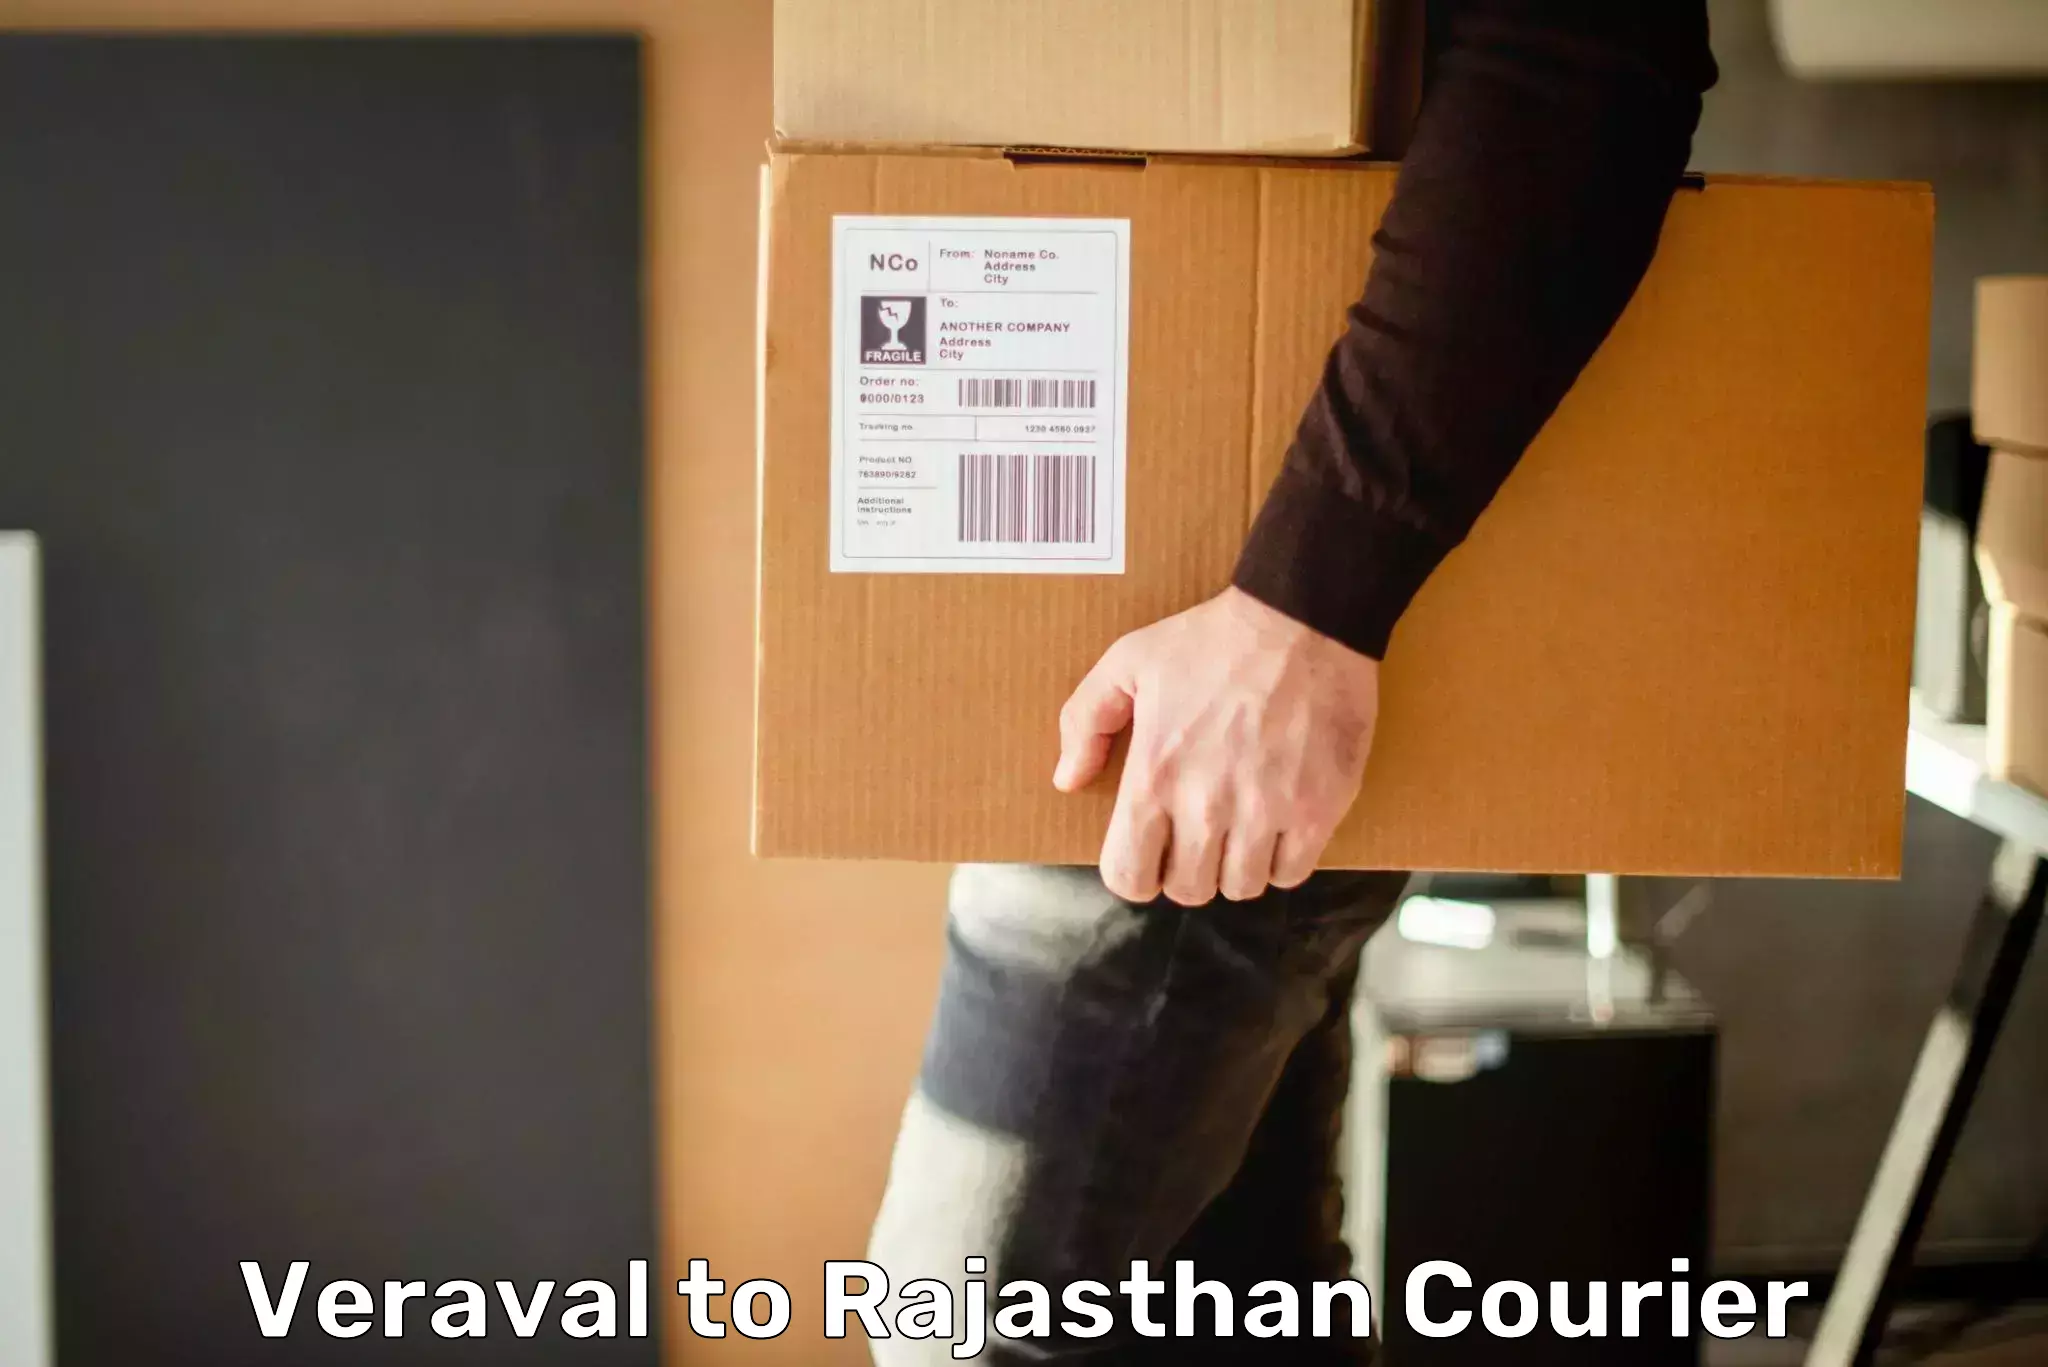 Professional courier handling Veraval to Bhiwadi